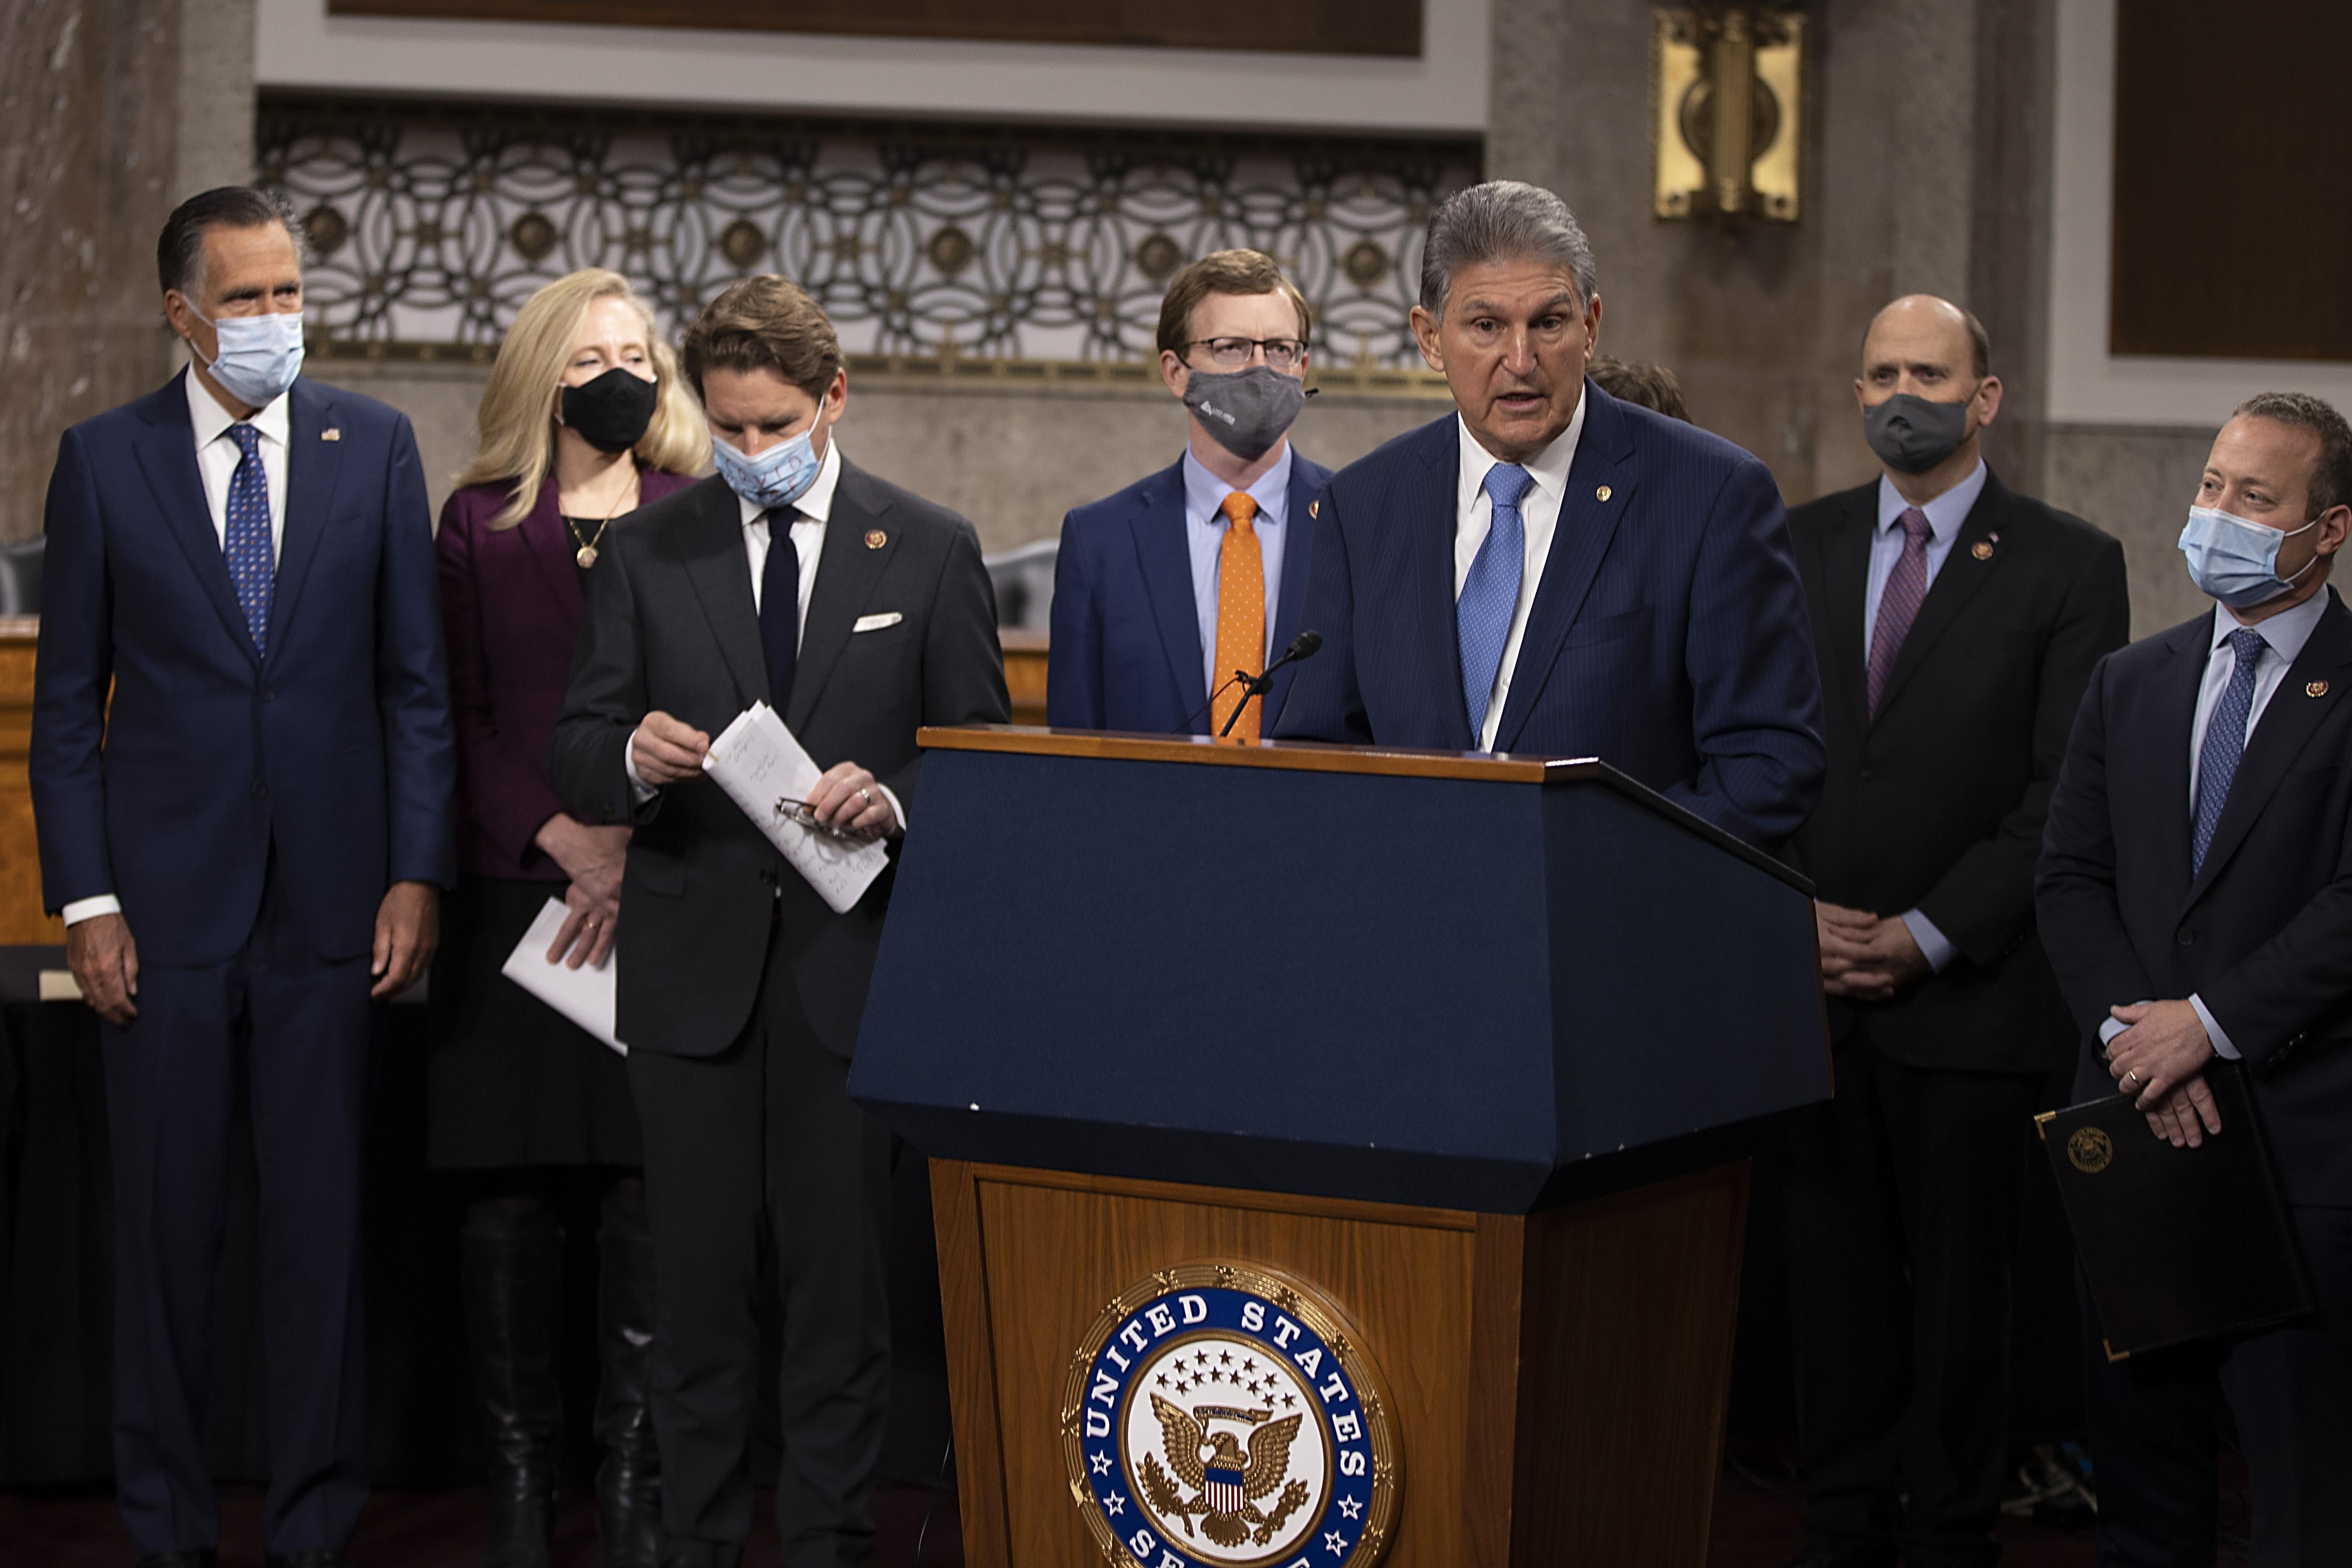 Joe Manchin speaks at a podium, surrounded by colleagues in masks.